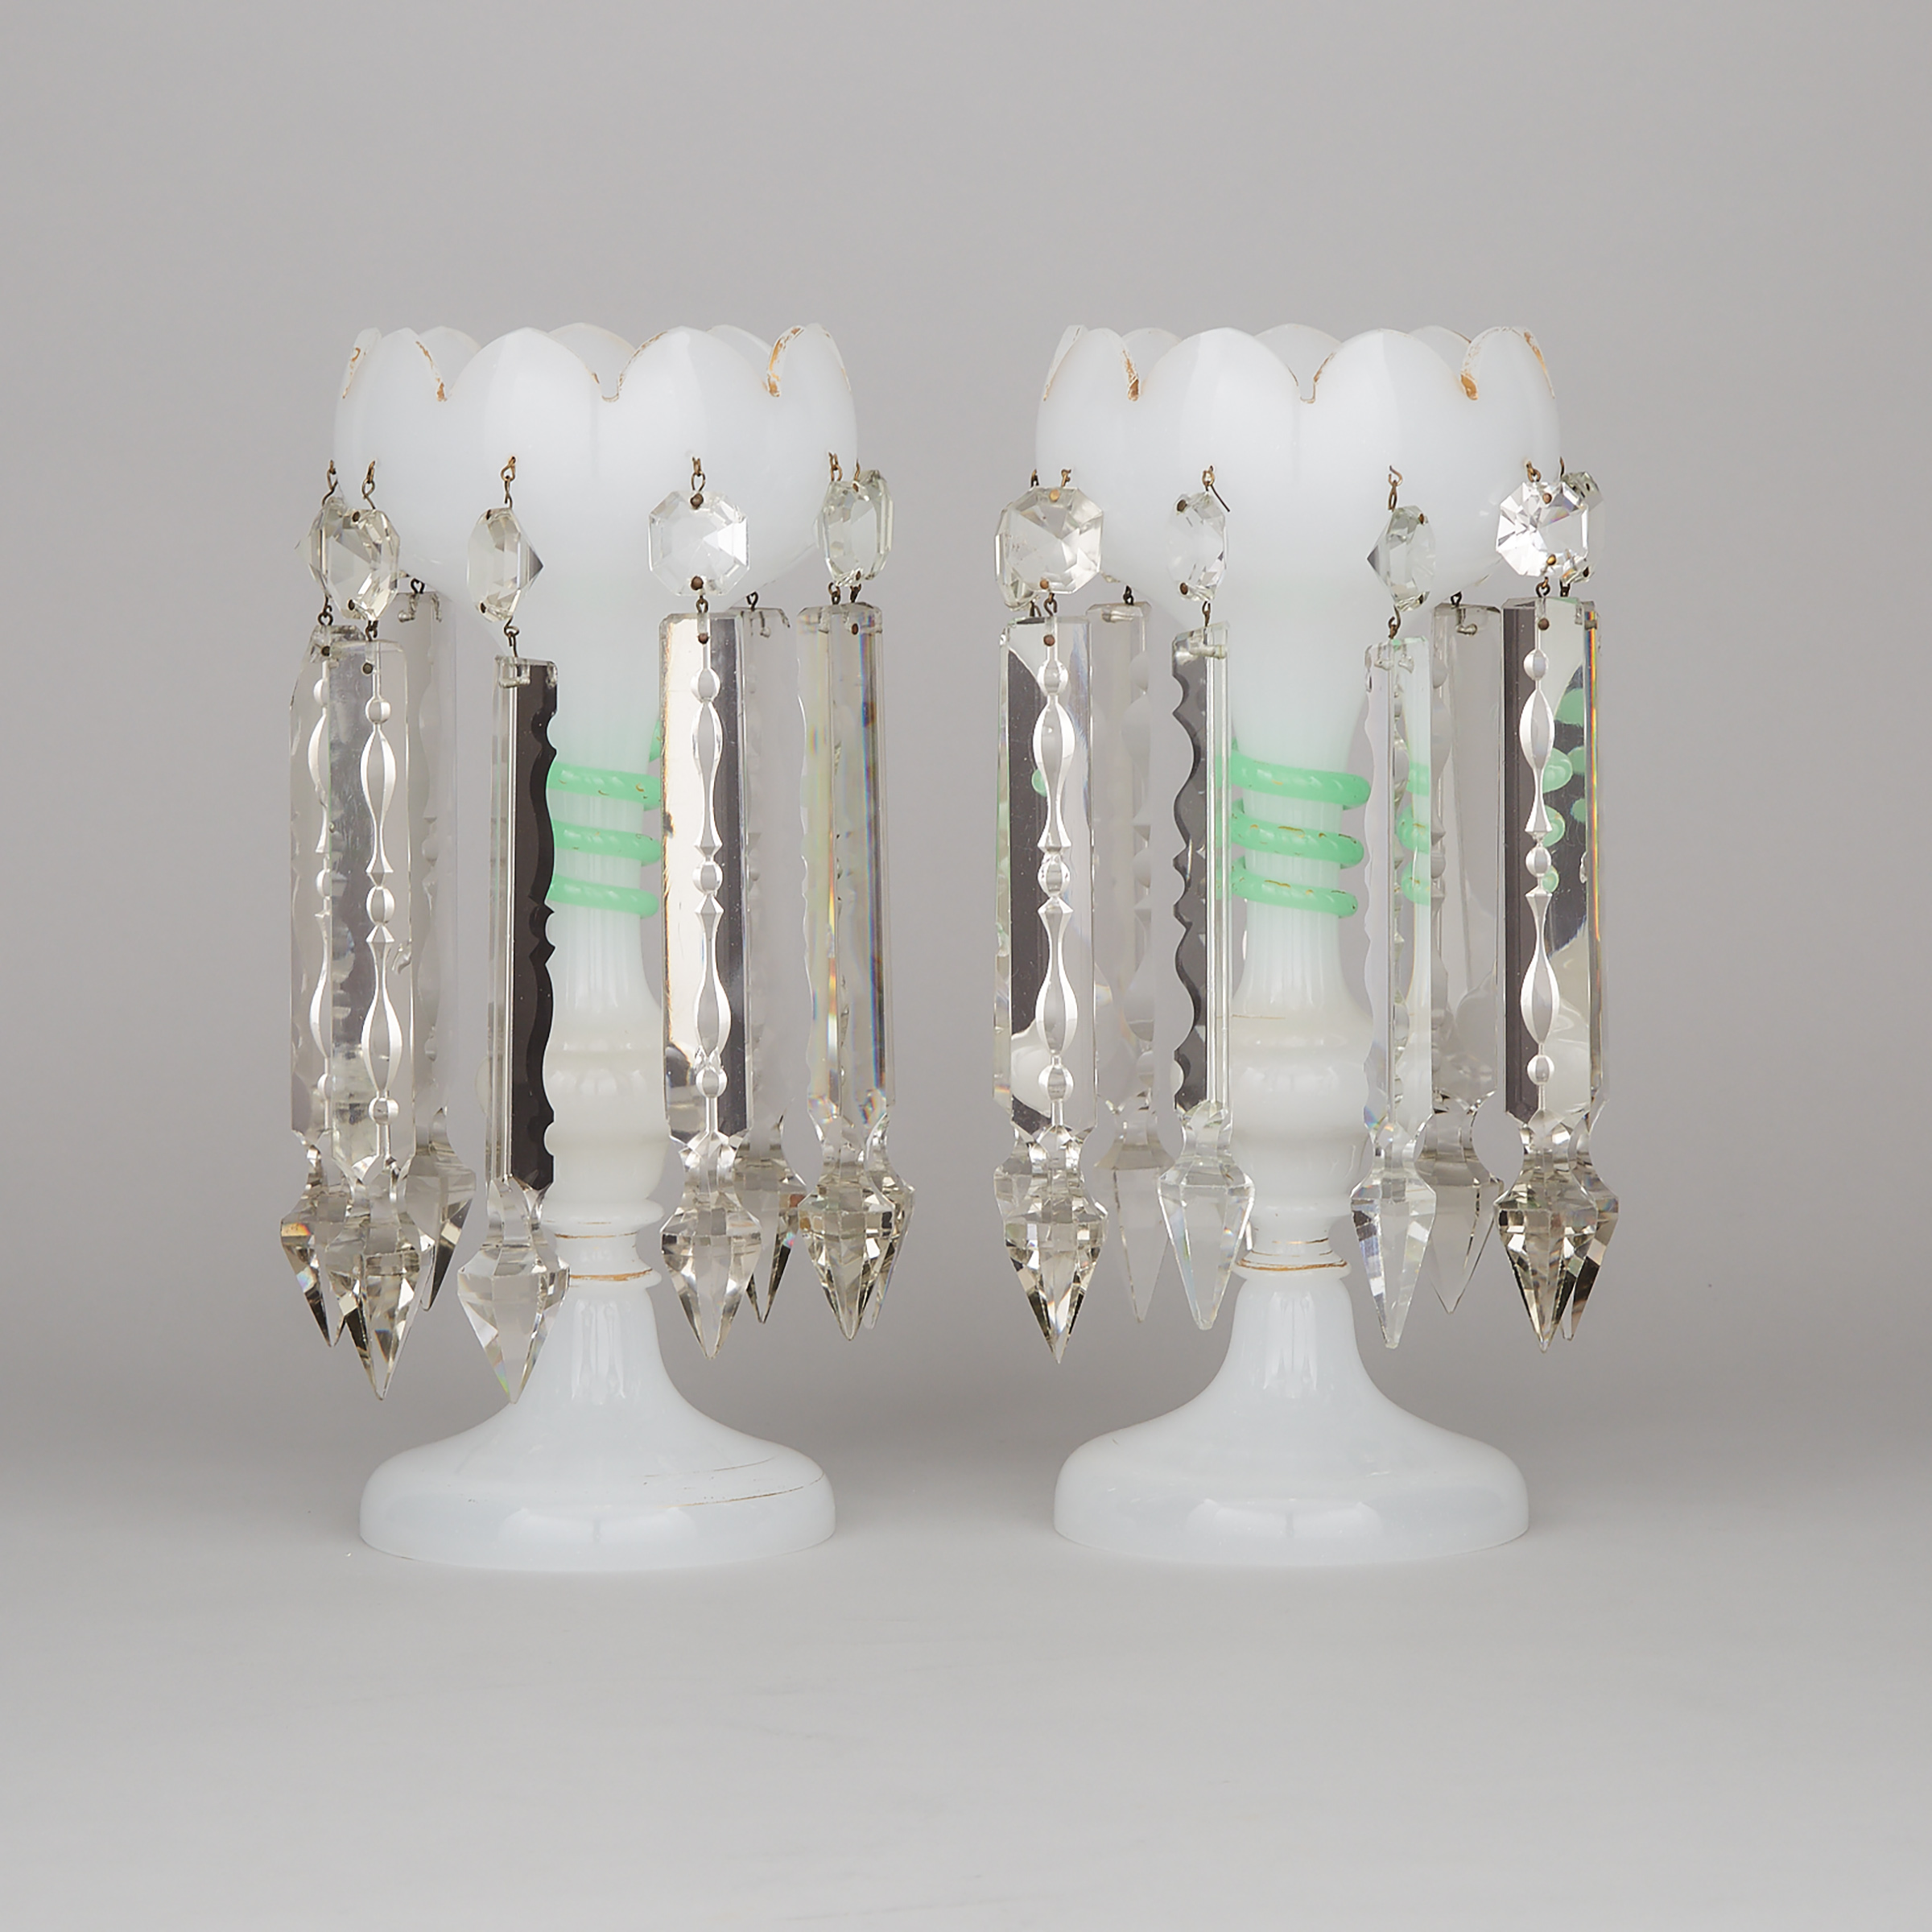 Pair of French Opaline Glass Lustres, late 19th century